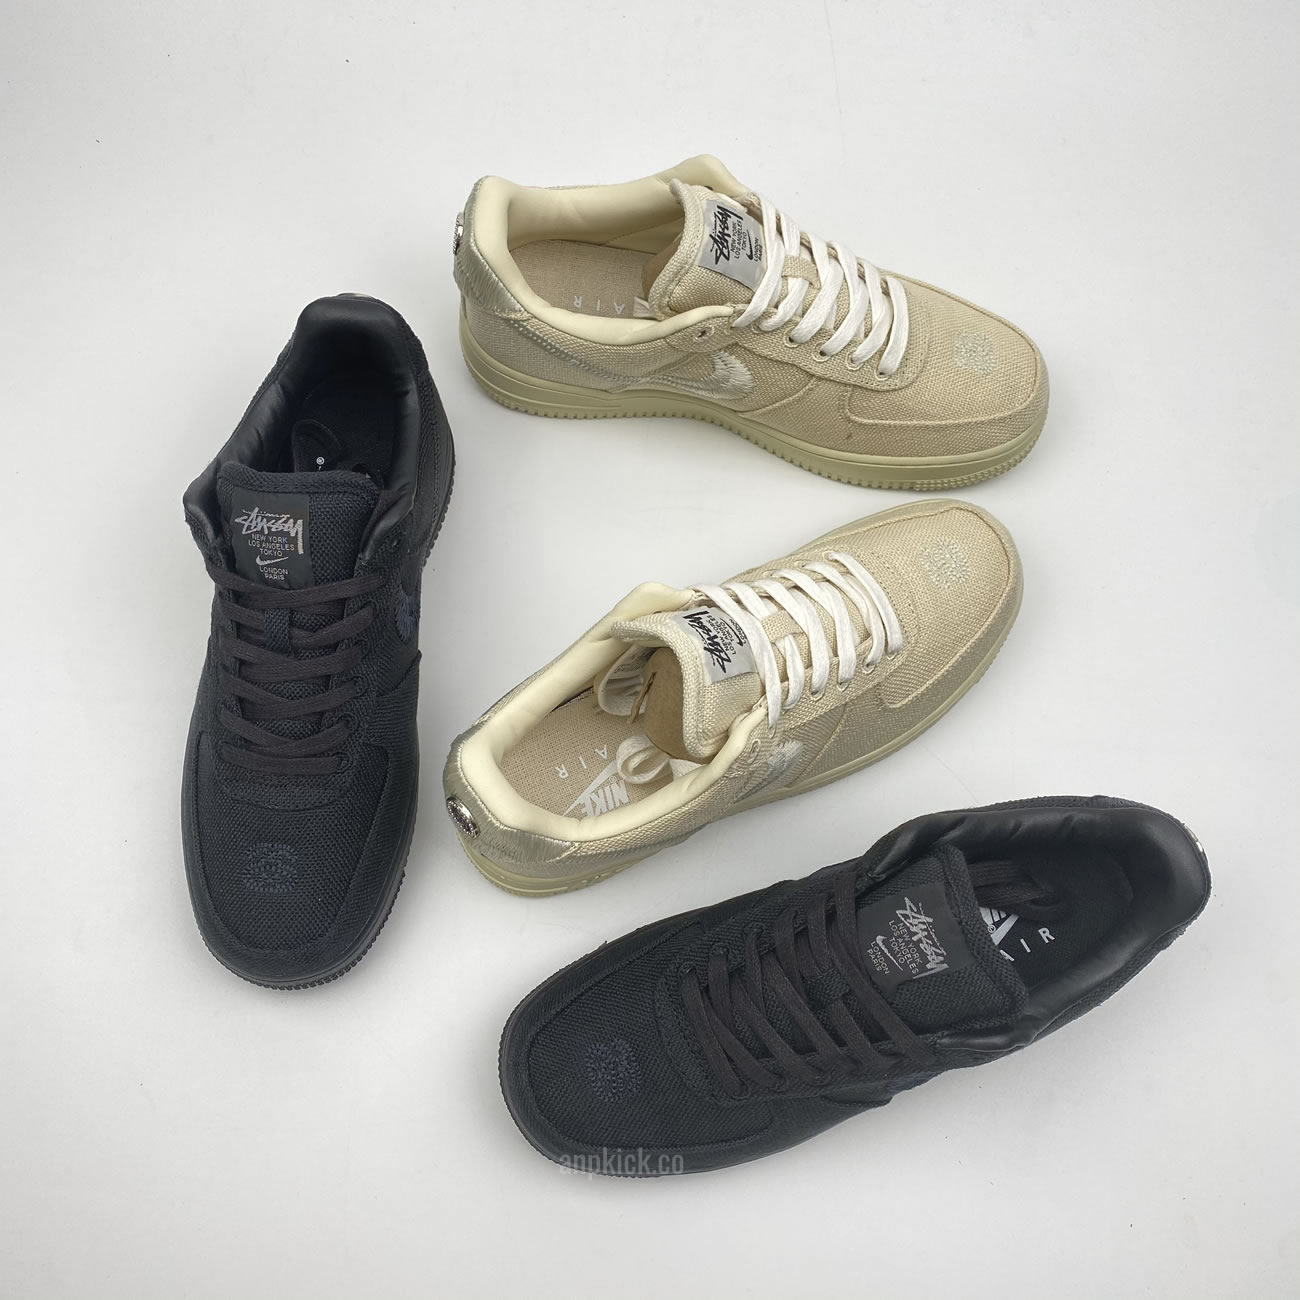 Stussy Nike Air Force 1 Low Fossil Stone Cz9084 200 Release Date (9) - newkick.org